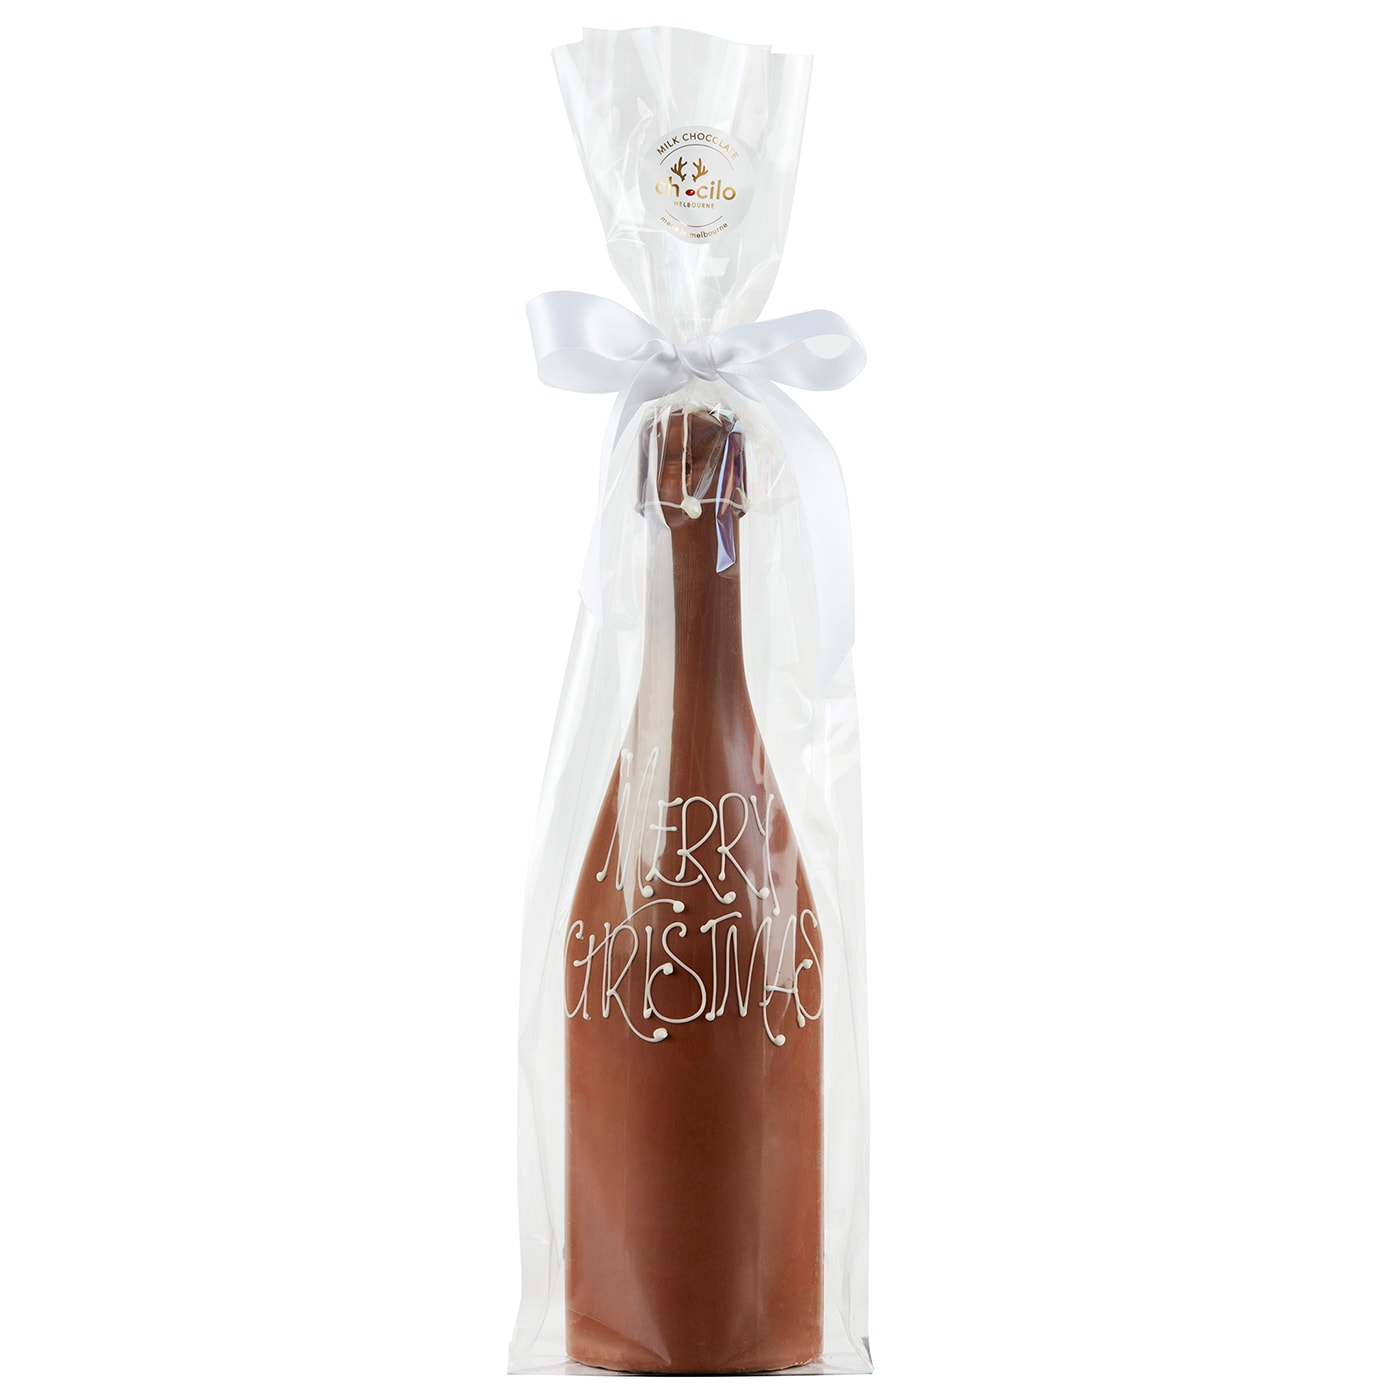 Chocilo Melbourne Large Christmas Milk Chocolate Champagne Bottle Gift. Hand made in Melbourne.